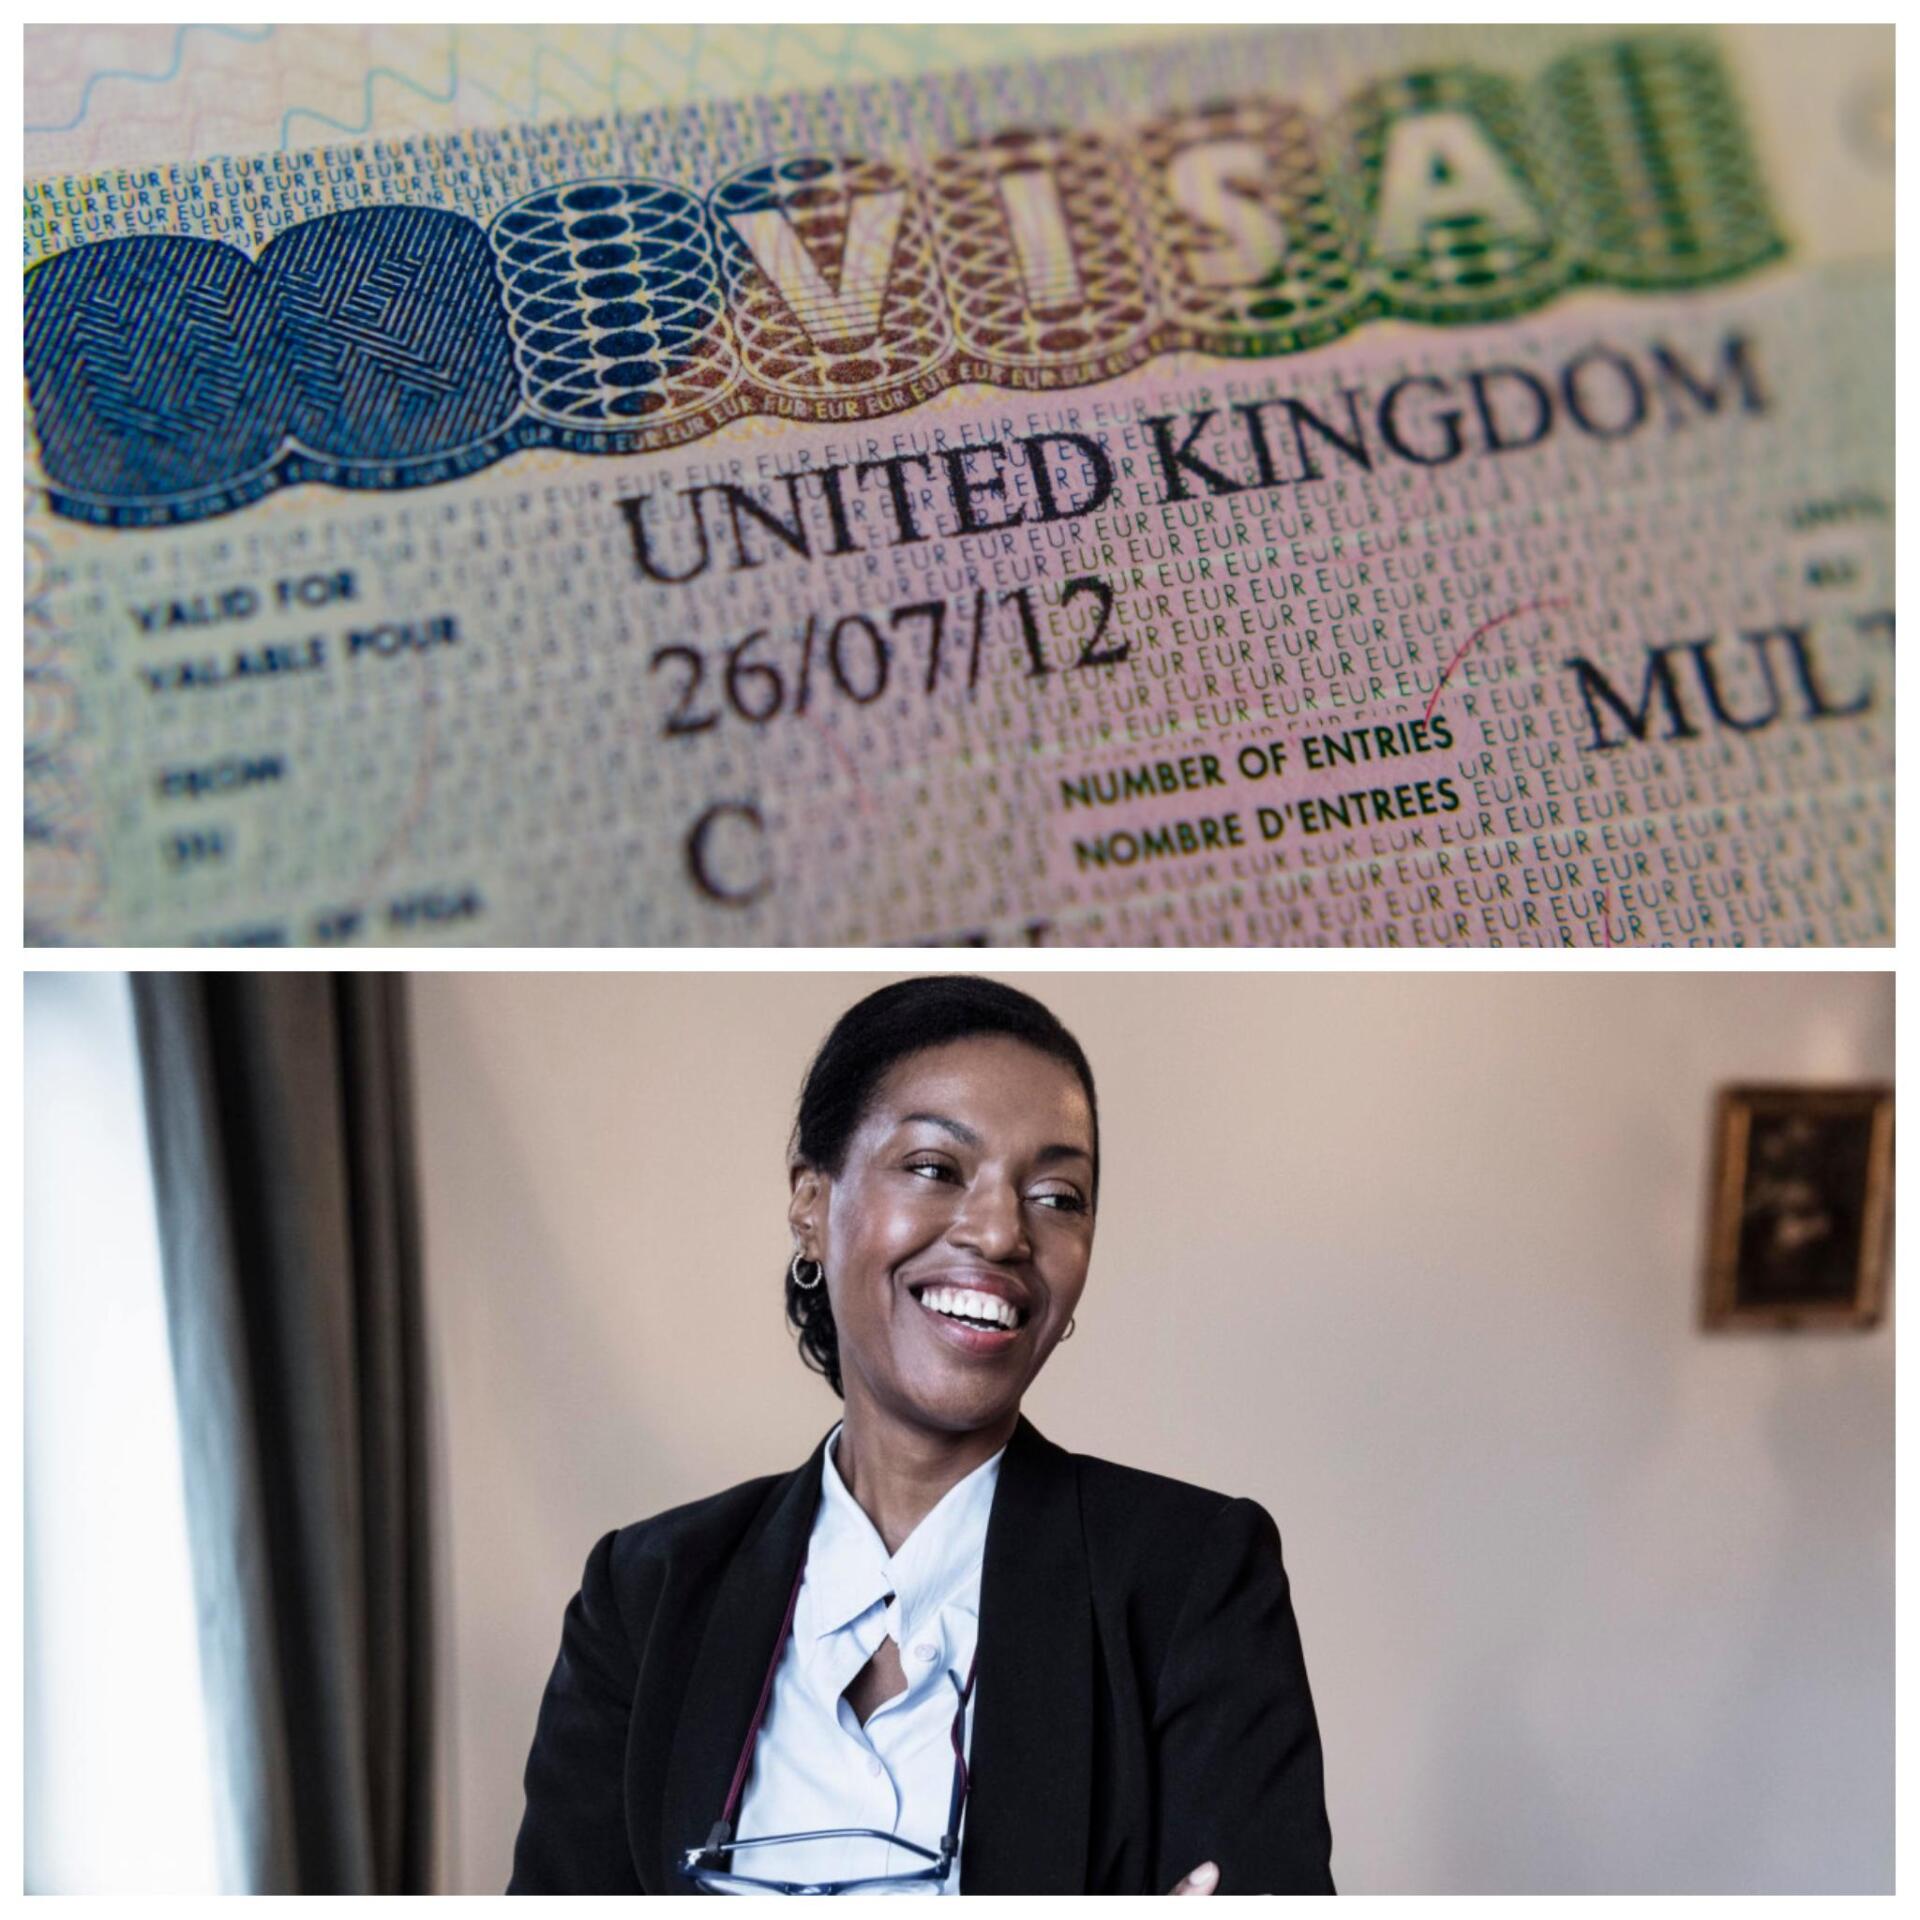 UK Immigration lawyers in Glasgow with visa stamp image